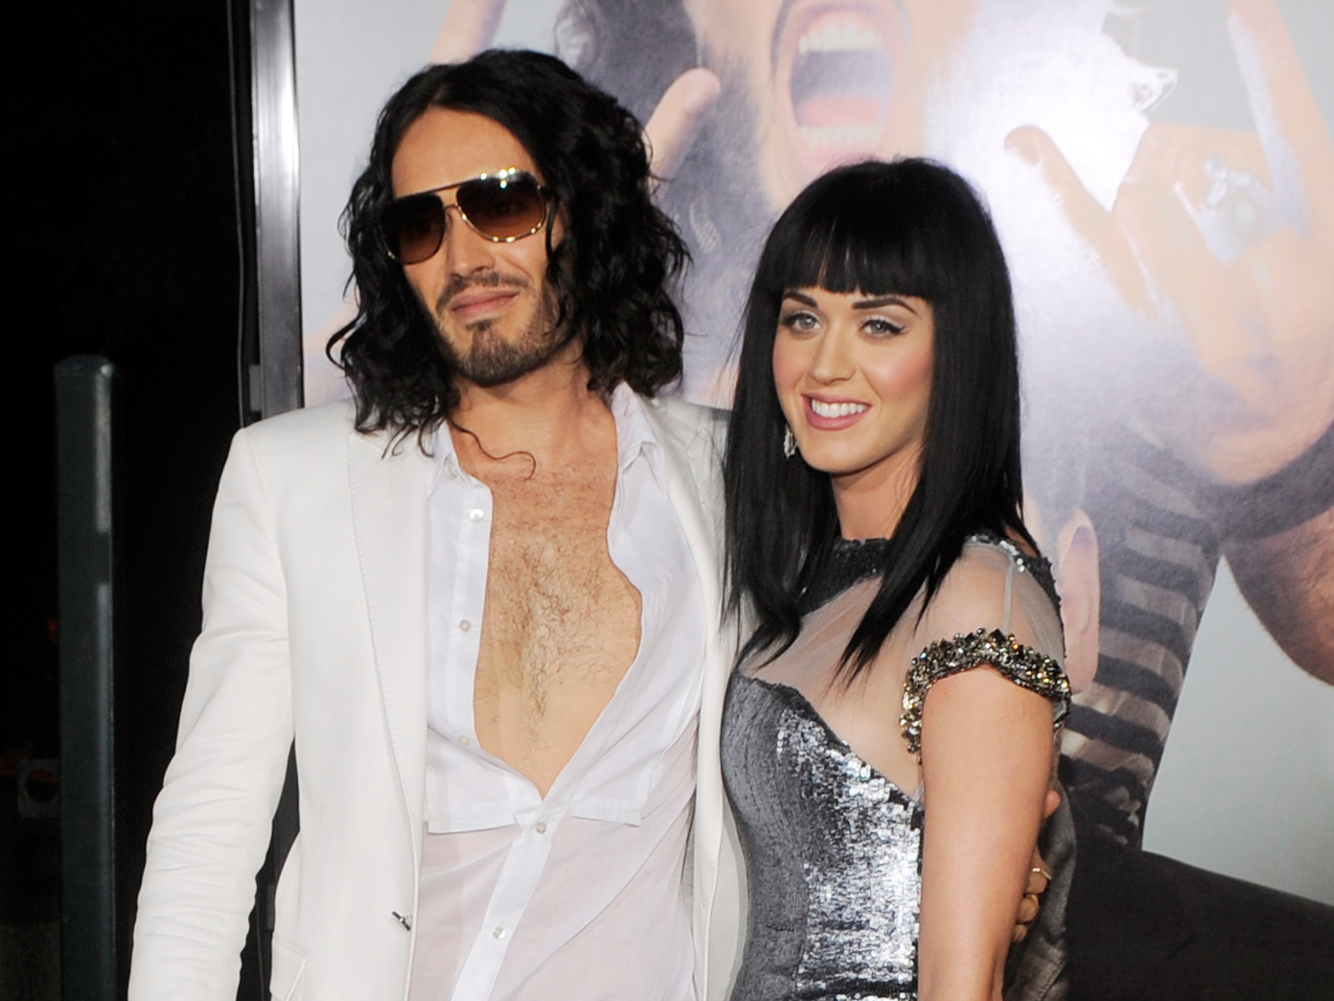 Katy Perry bought Russell Brand a $200,000 ticket to space.